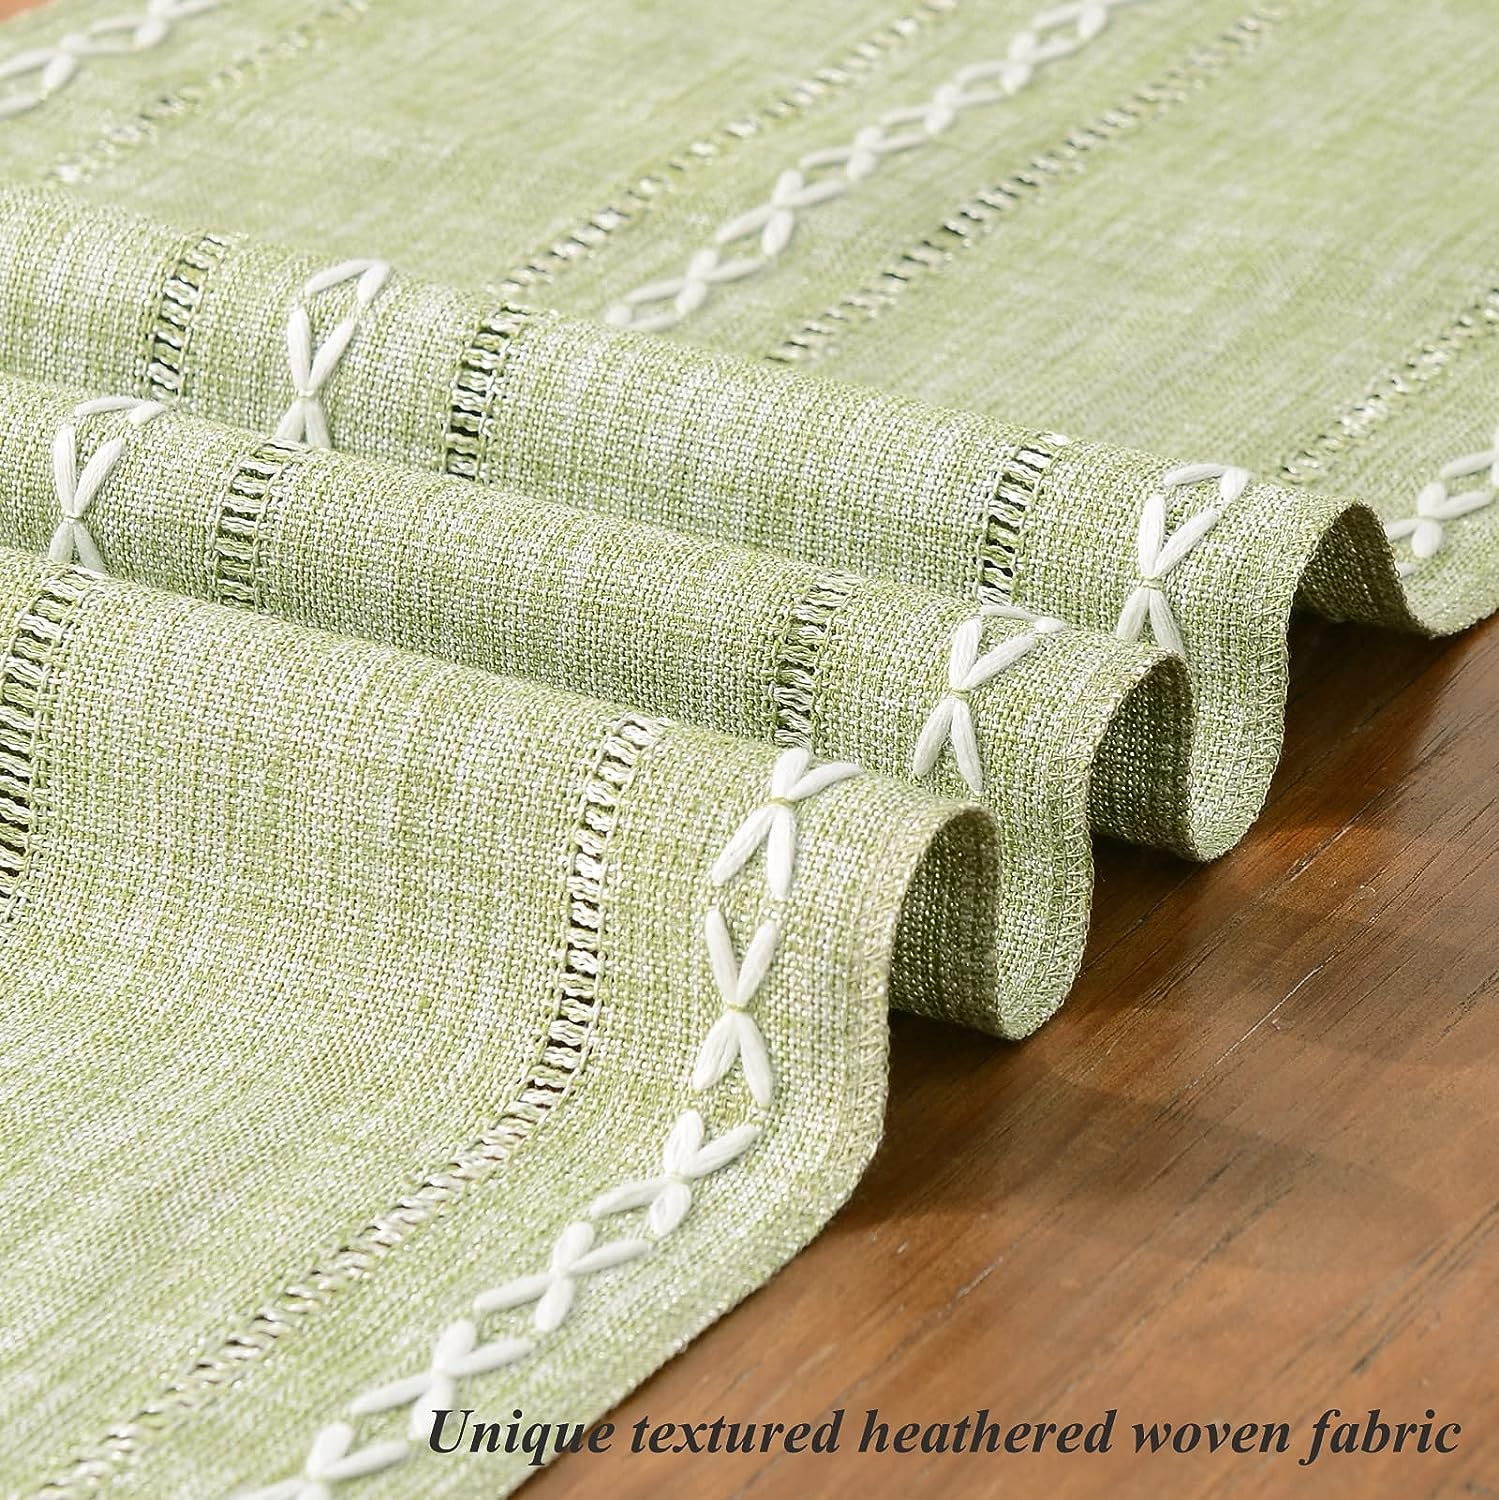 Wracra Hemstitch Cotton Linen Table Runner Farmhouse Style Sage Green Table Runner 180cm Long with Hand-tassels for Dining Kitchen Party and Dessert Table Decor(Sage Green, 180cm) 3